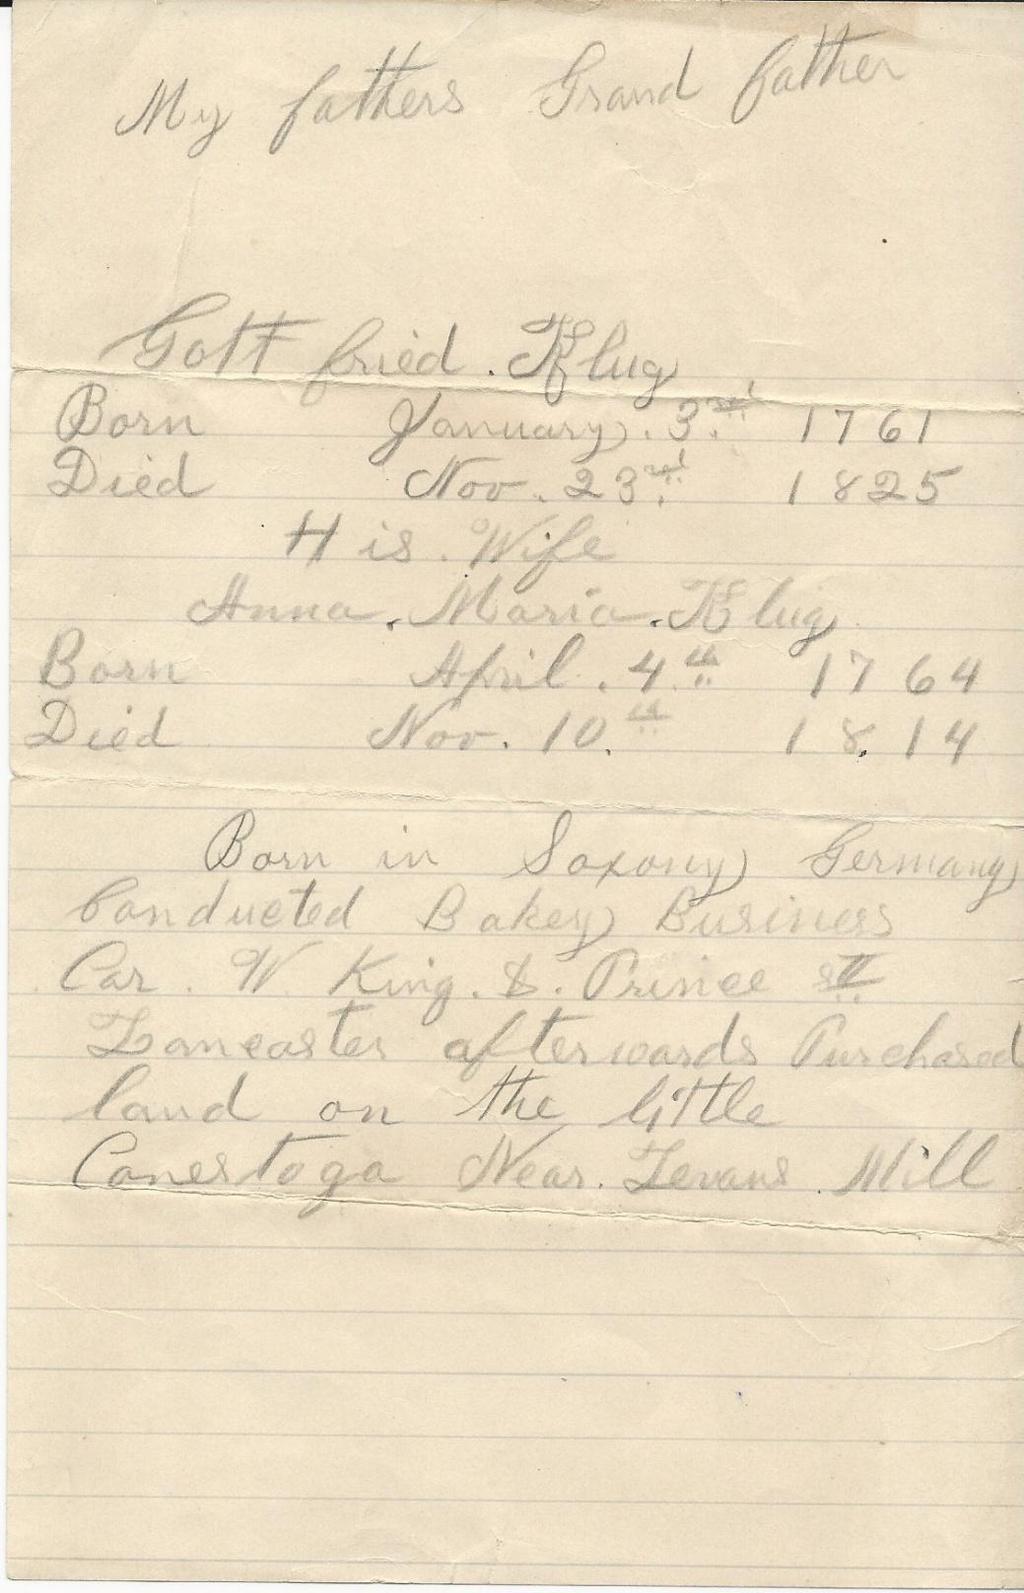 Klugh family history notes written by Jacob H. Klugh: Gottfried Klug was born in Lancaster County, Pennsylvania.